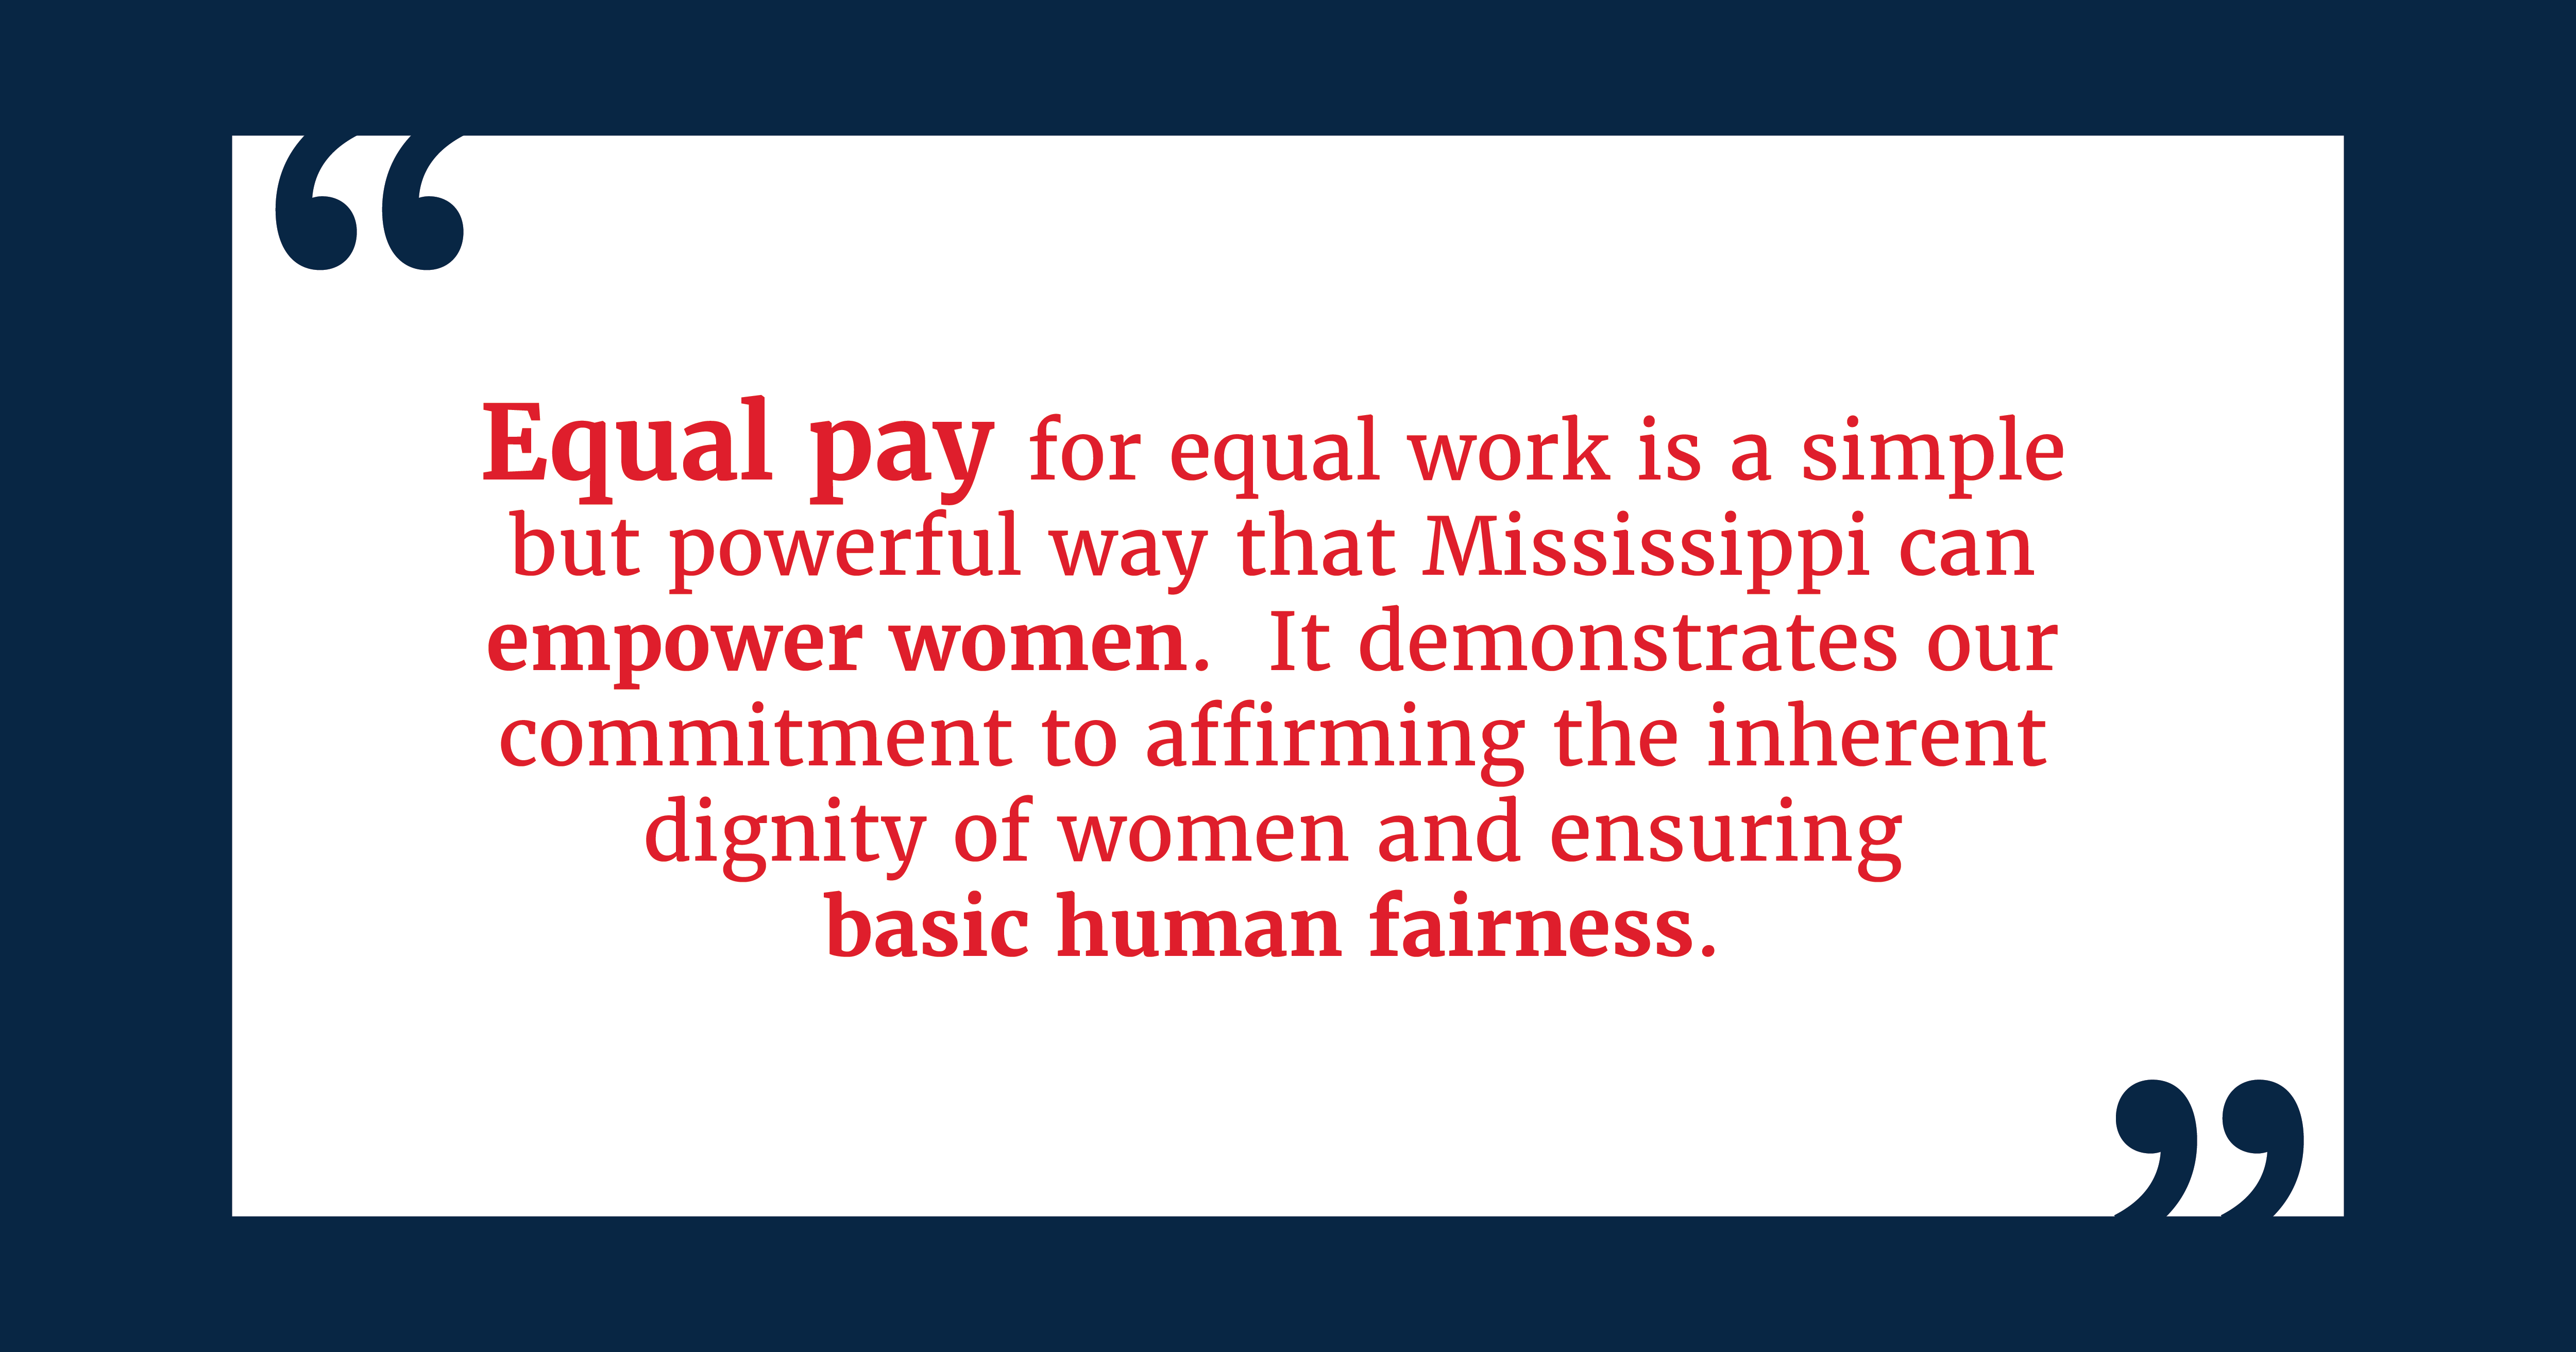 The MS Legislature has passed legislation affirming Equal Pay for Equal Work for MS Women